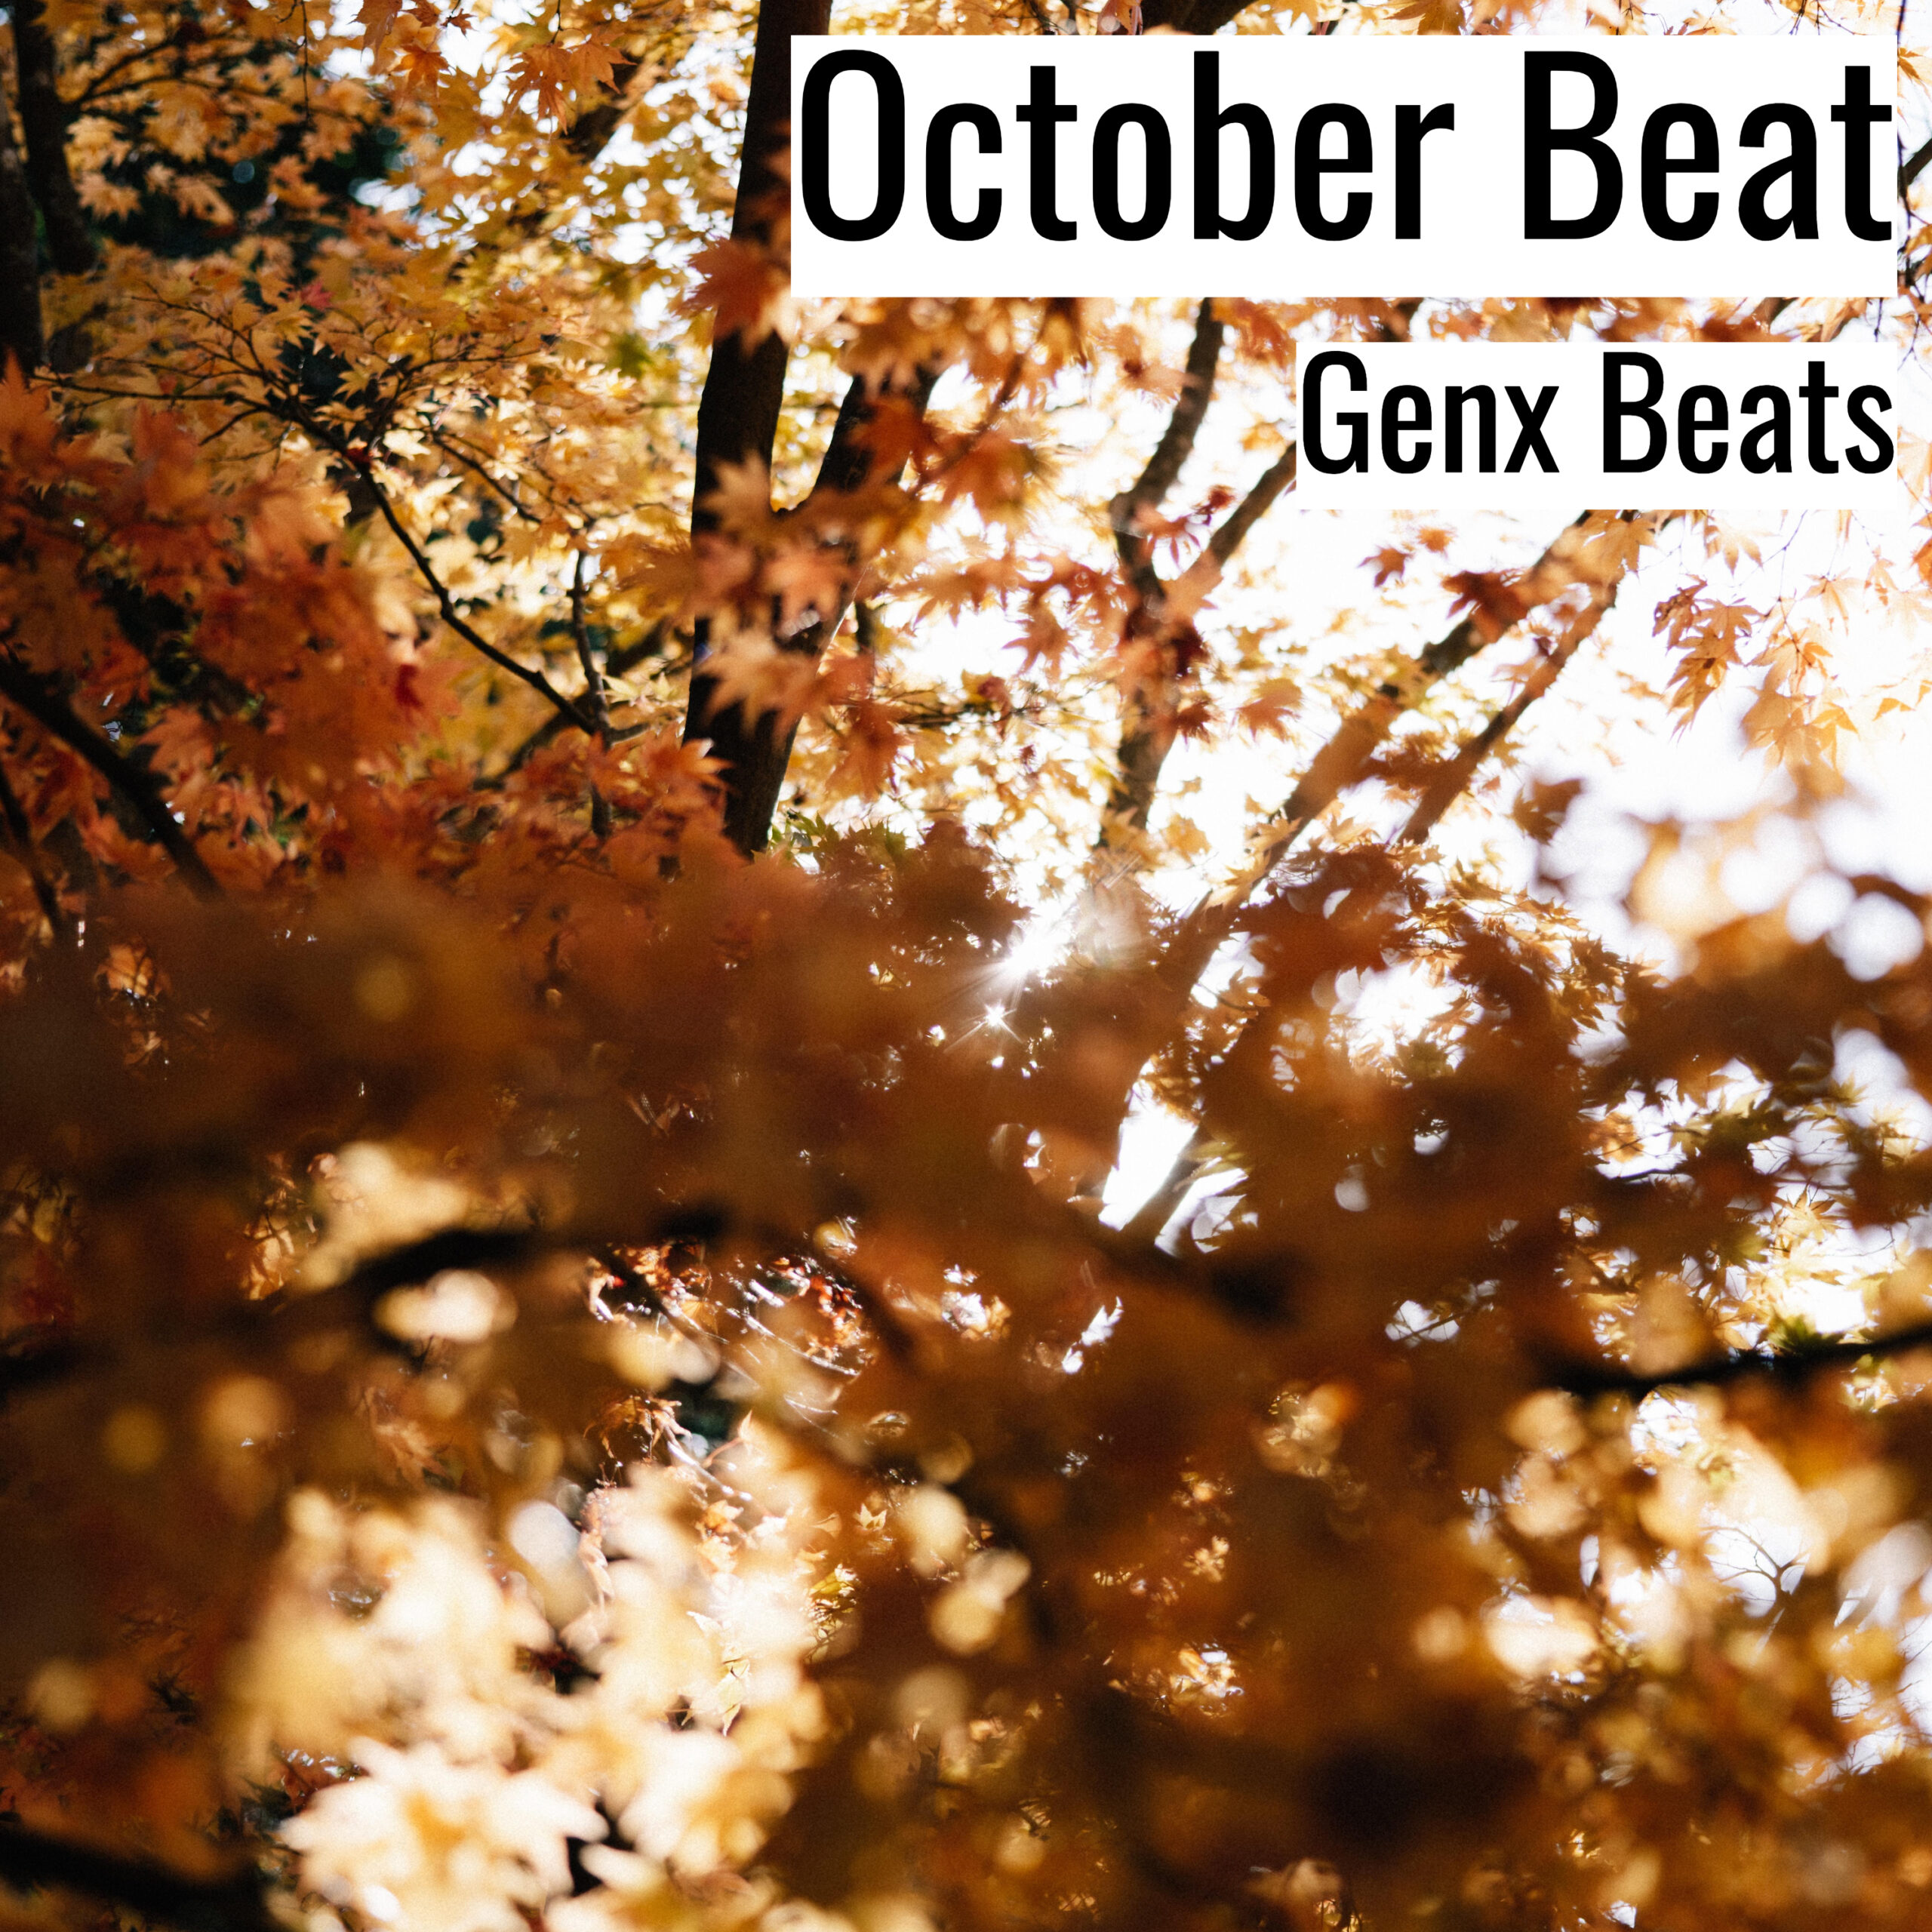 October Beat scaled